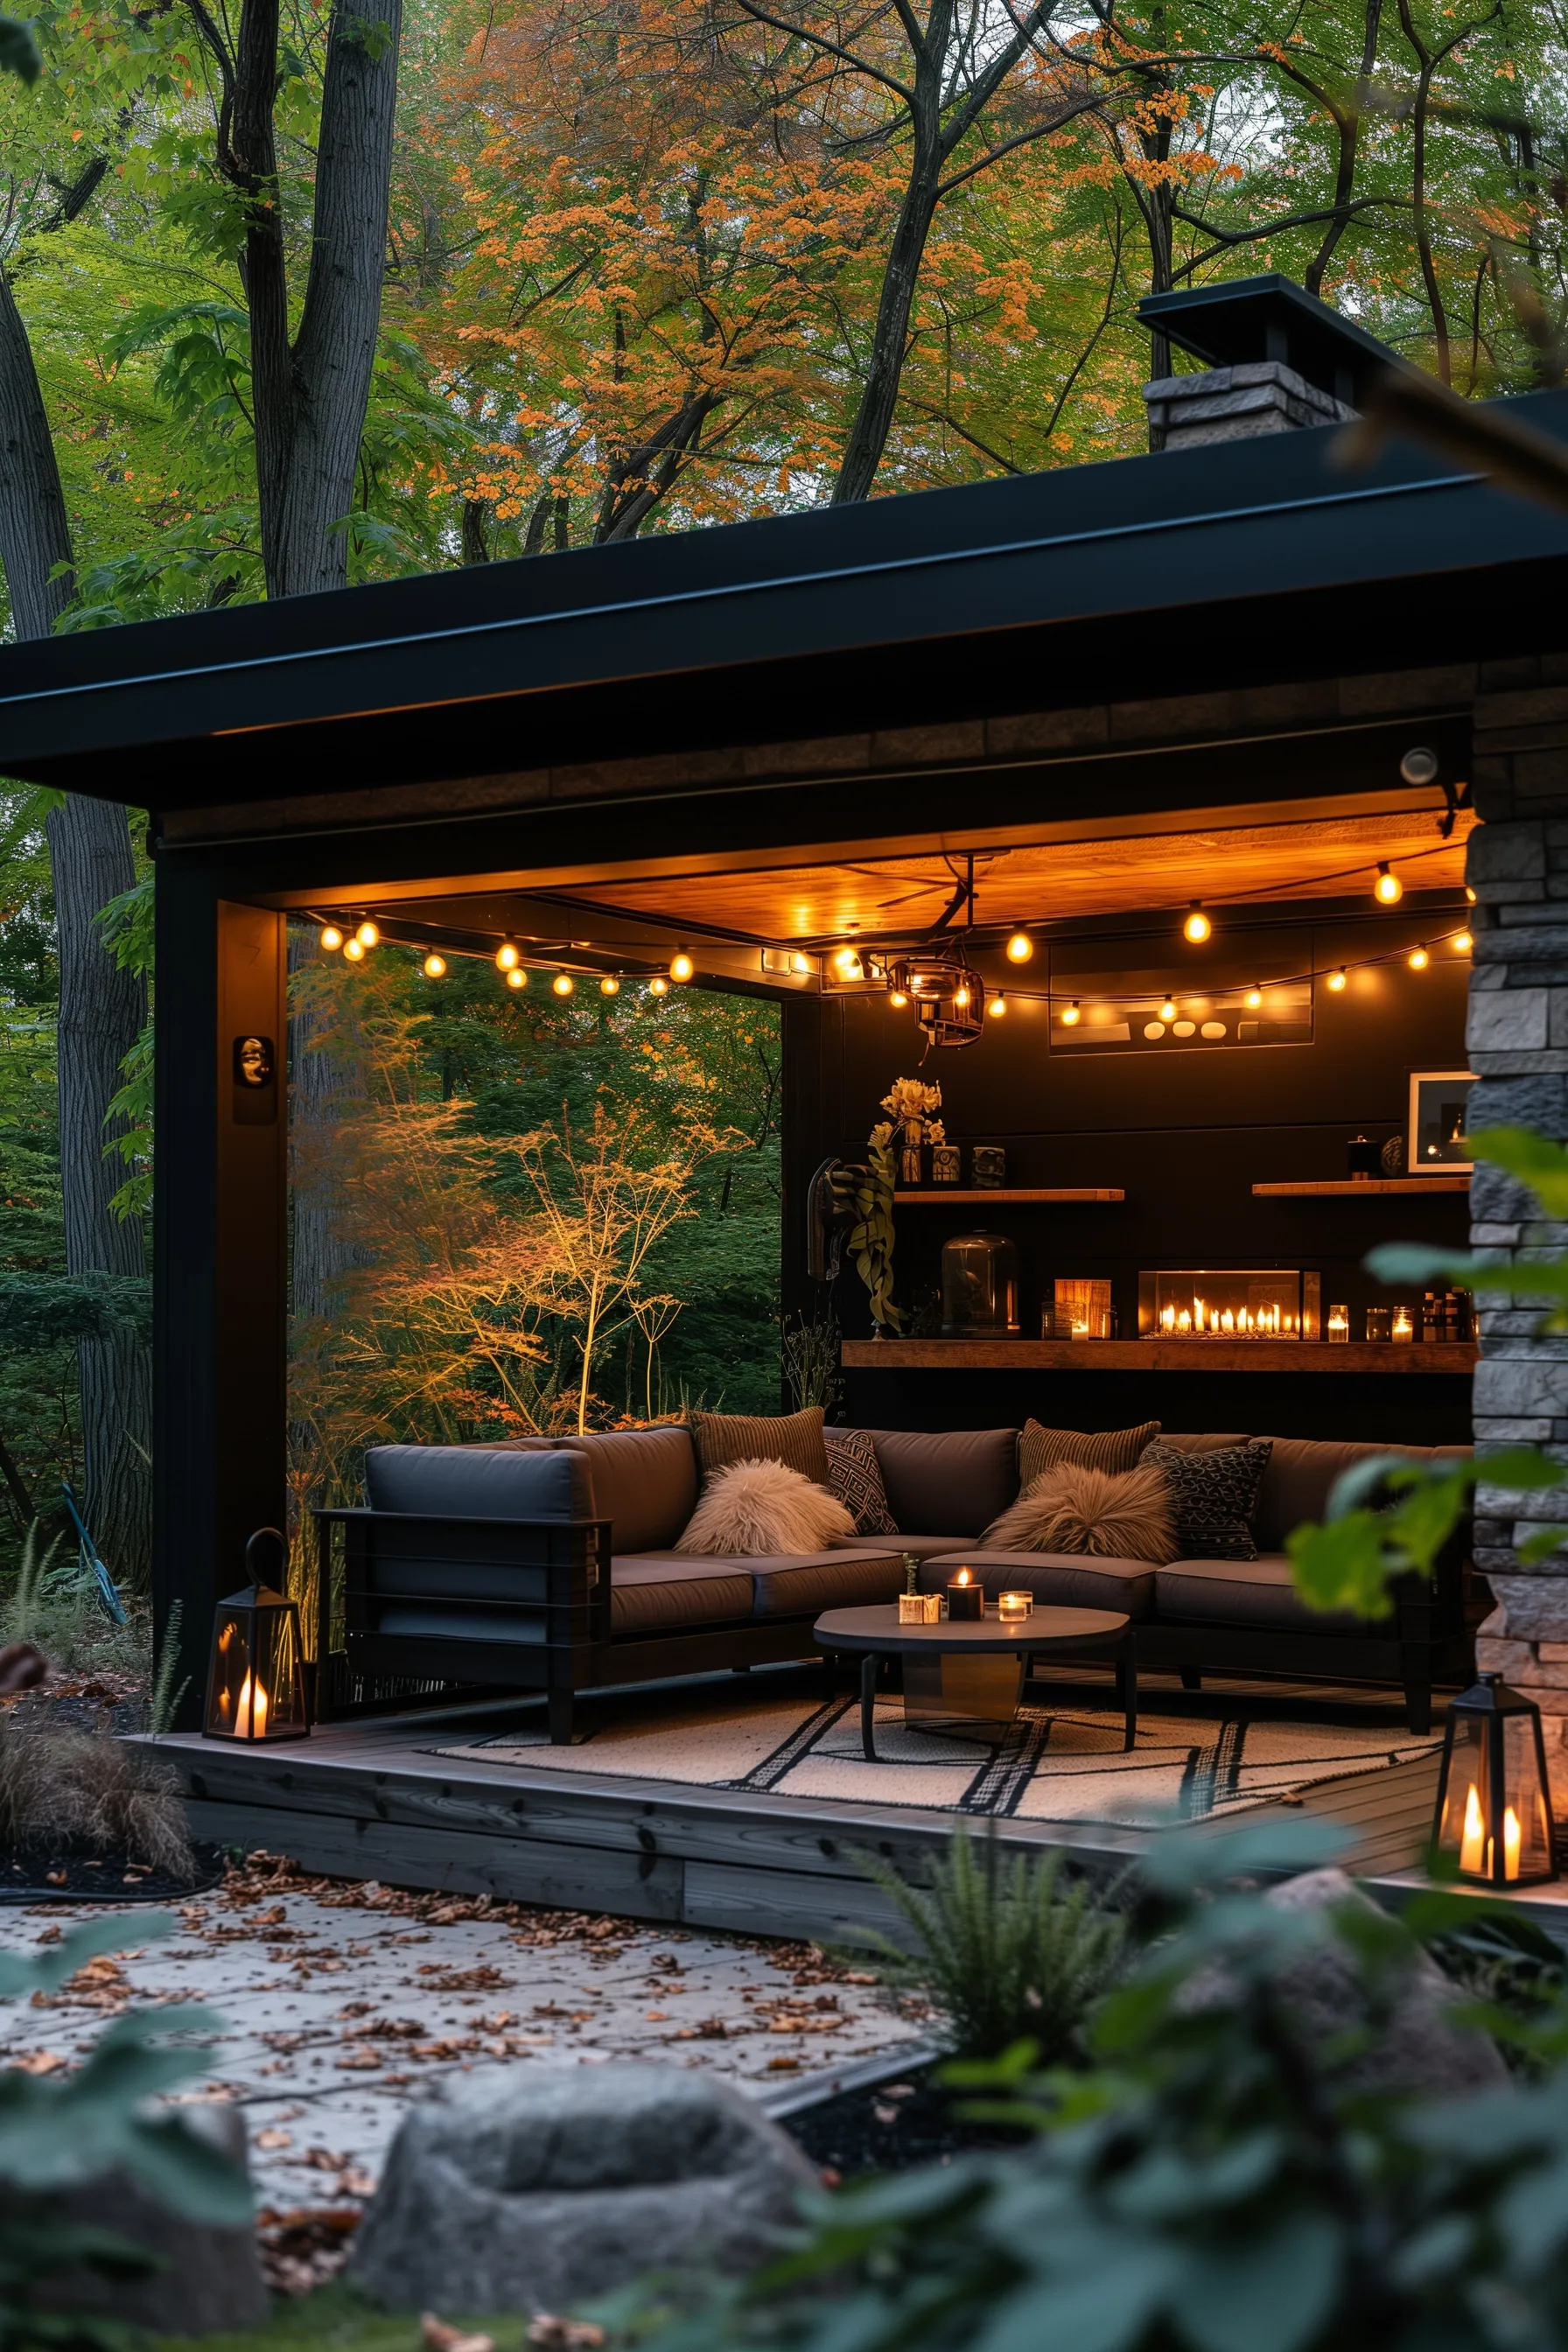 A shed with a couch, fire, candles and throw pillows